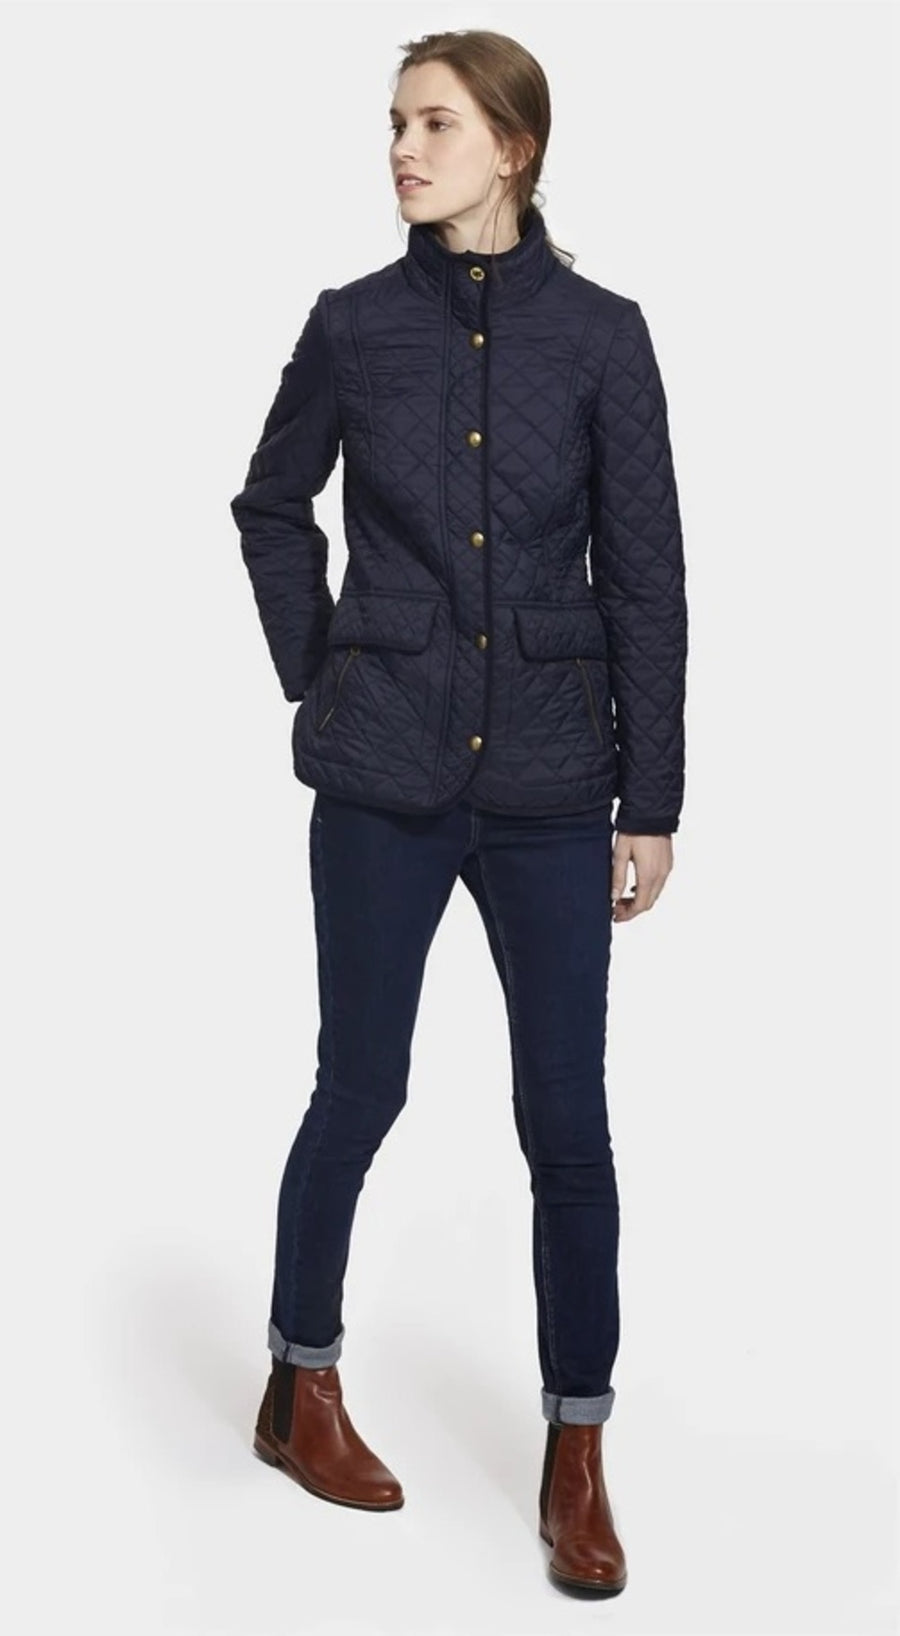 Joules Newdale Quilted Coat Marine Navy